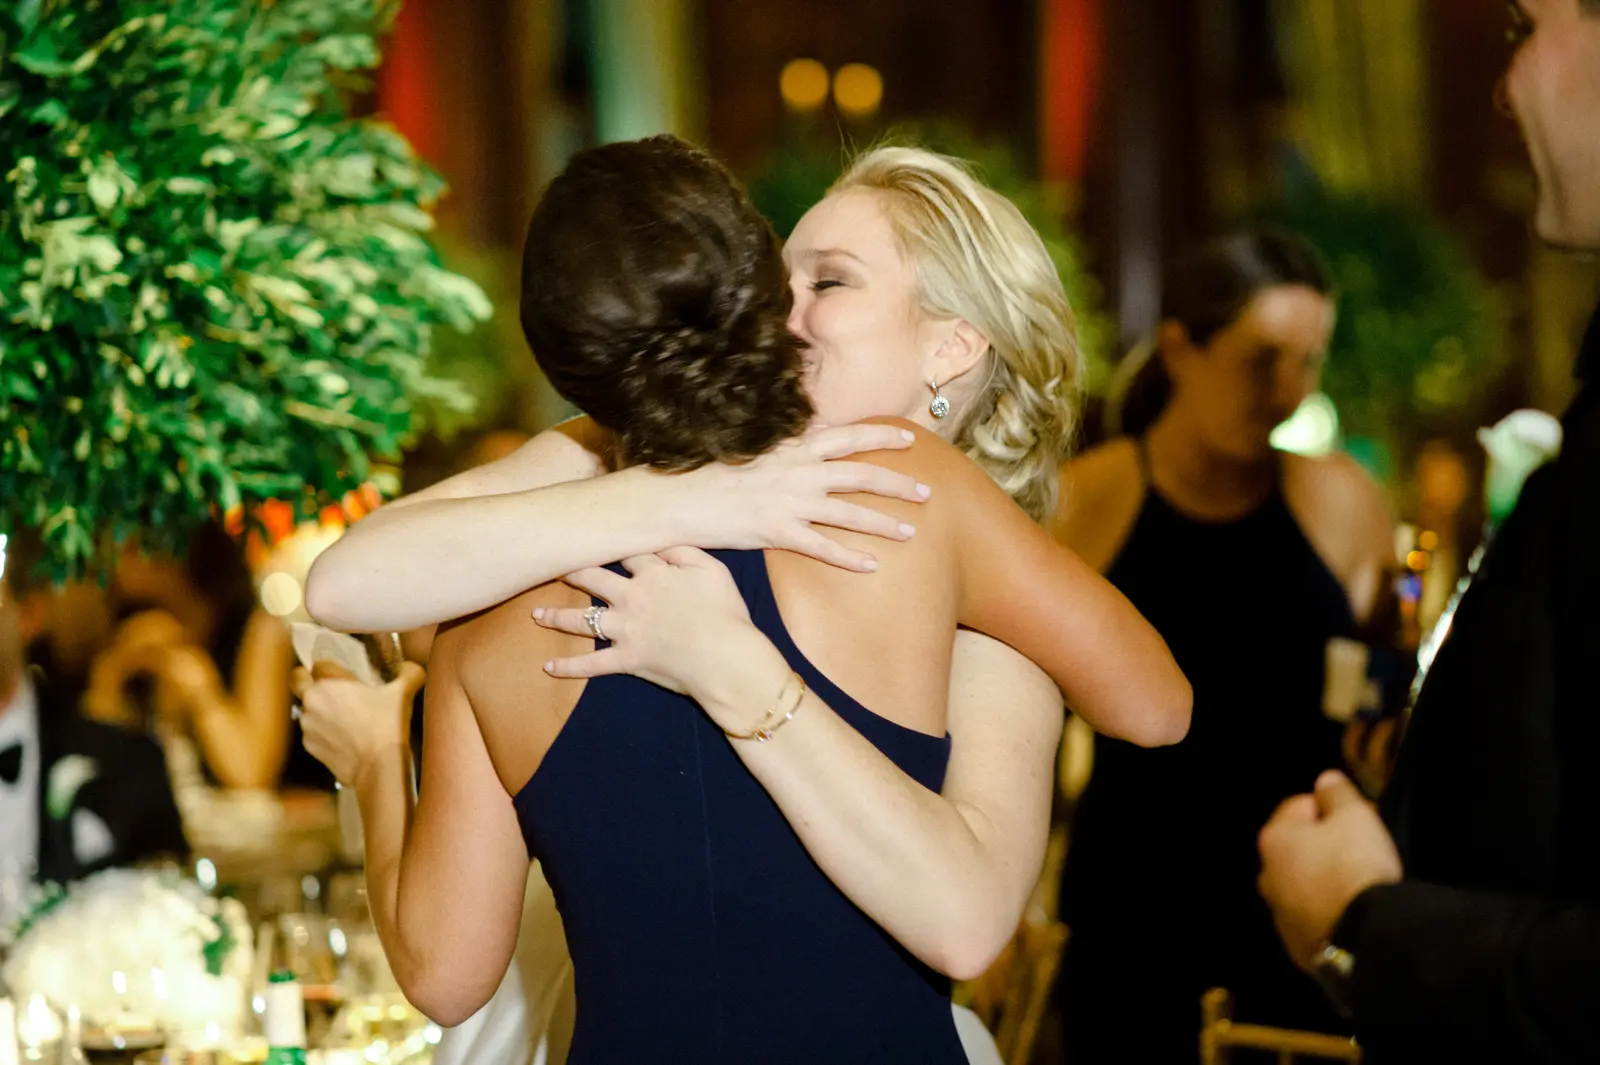 Two women hugging and kissing at the wedding